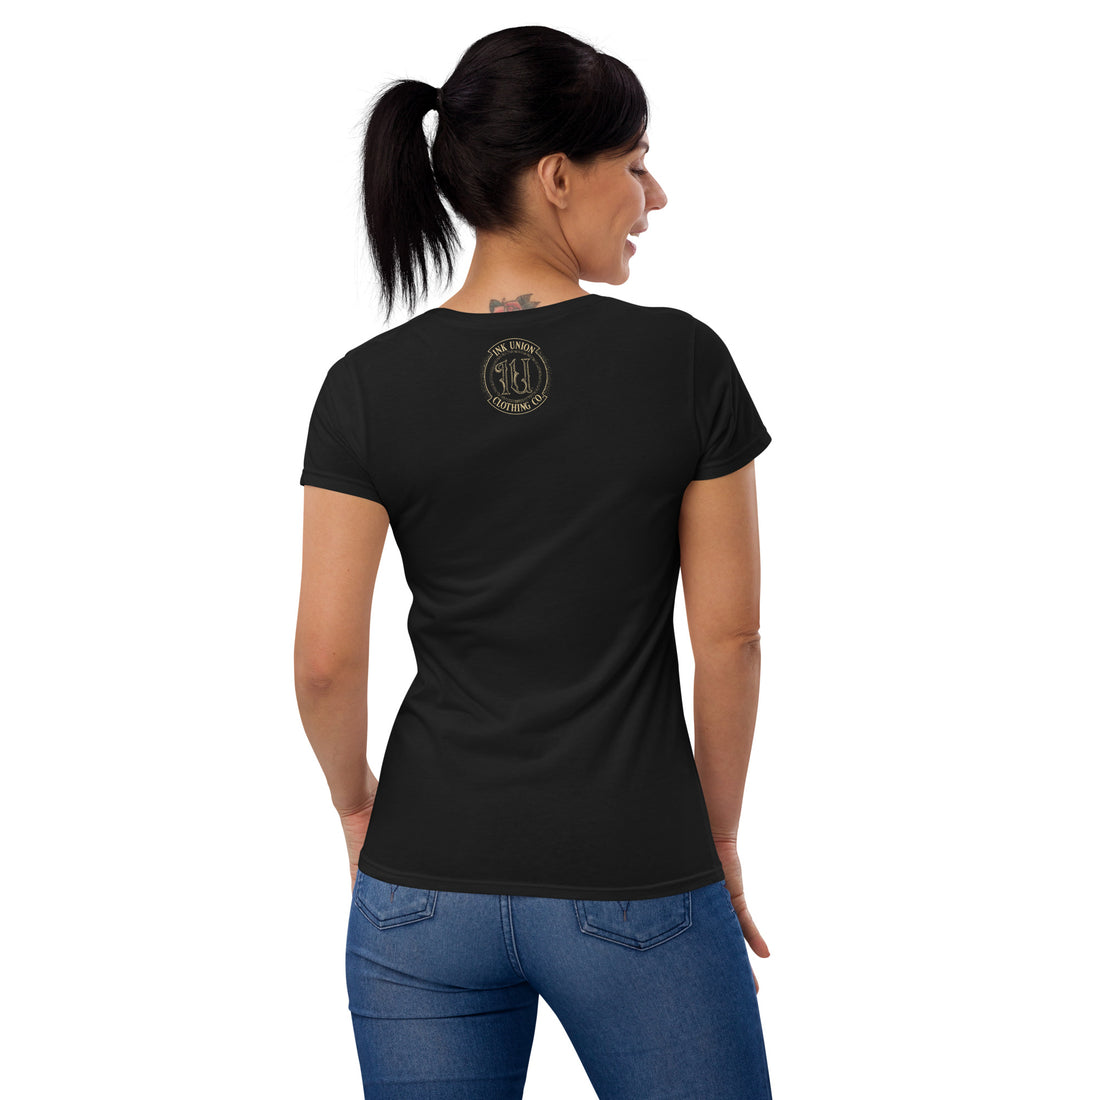 The rear view of an attractive woman wearing a black t-shirt with a small ink union logo just below the neckline.